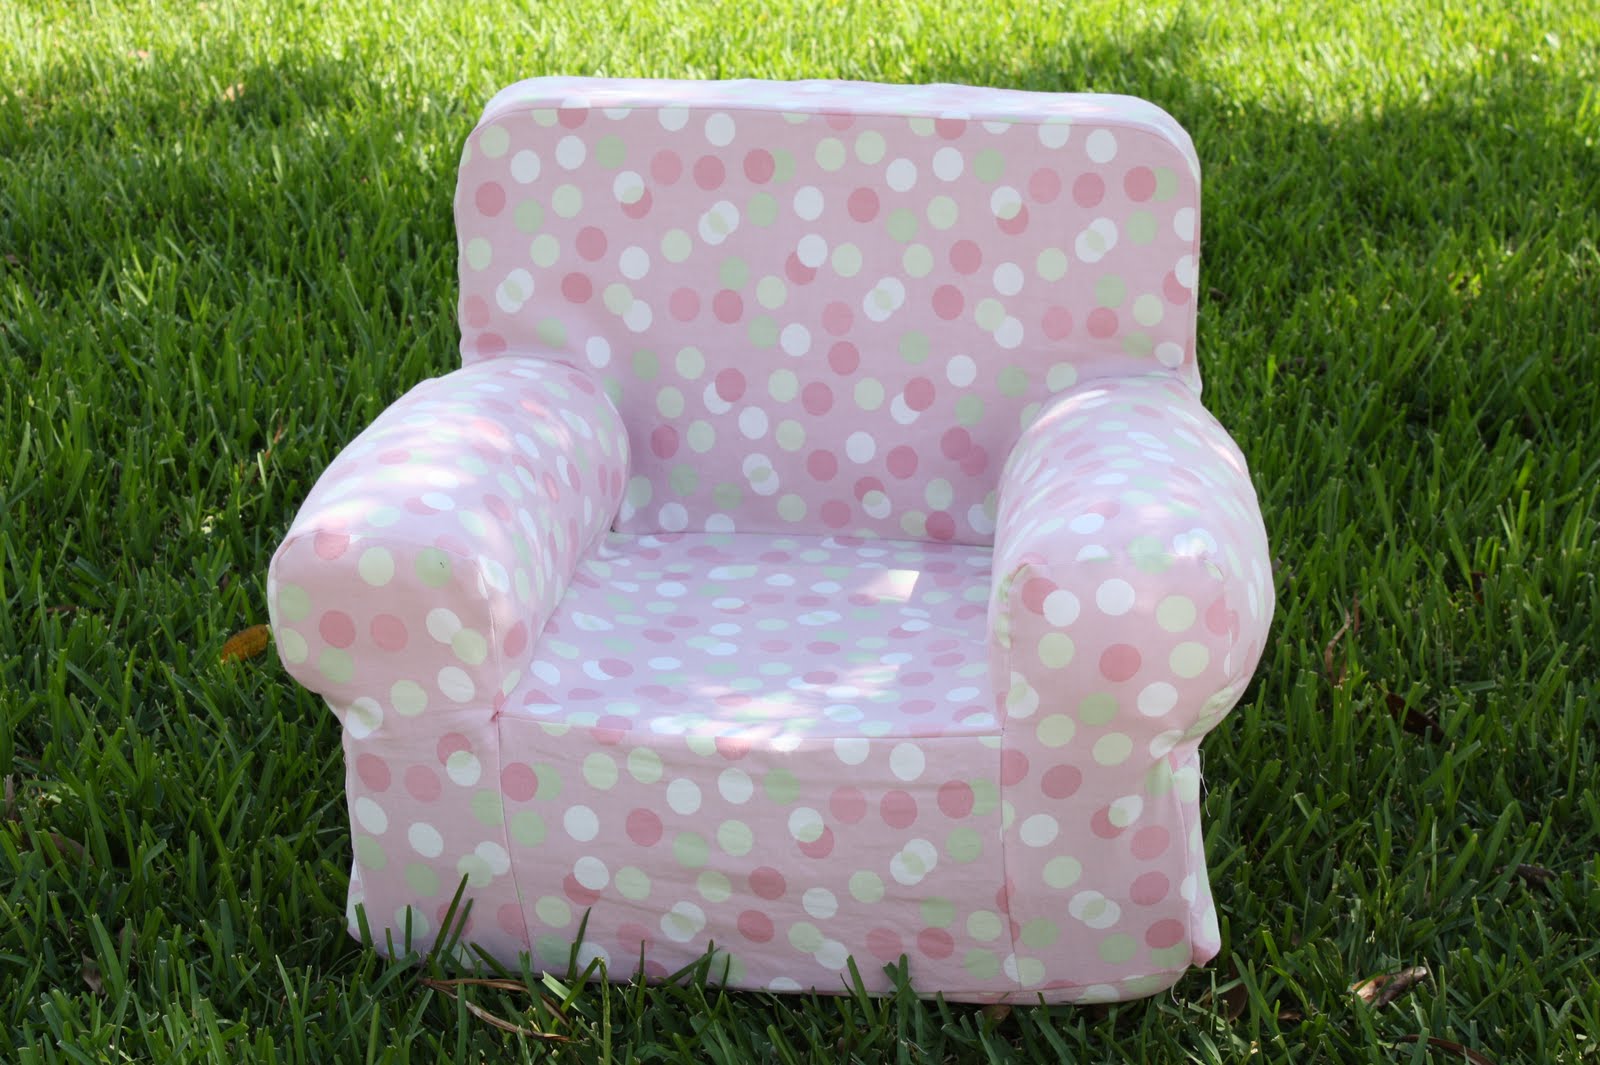 A Crafty Escape Knockoff Pottery Barn Anywhere Chair